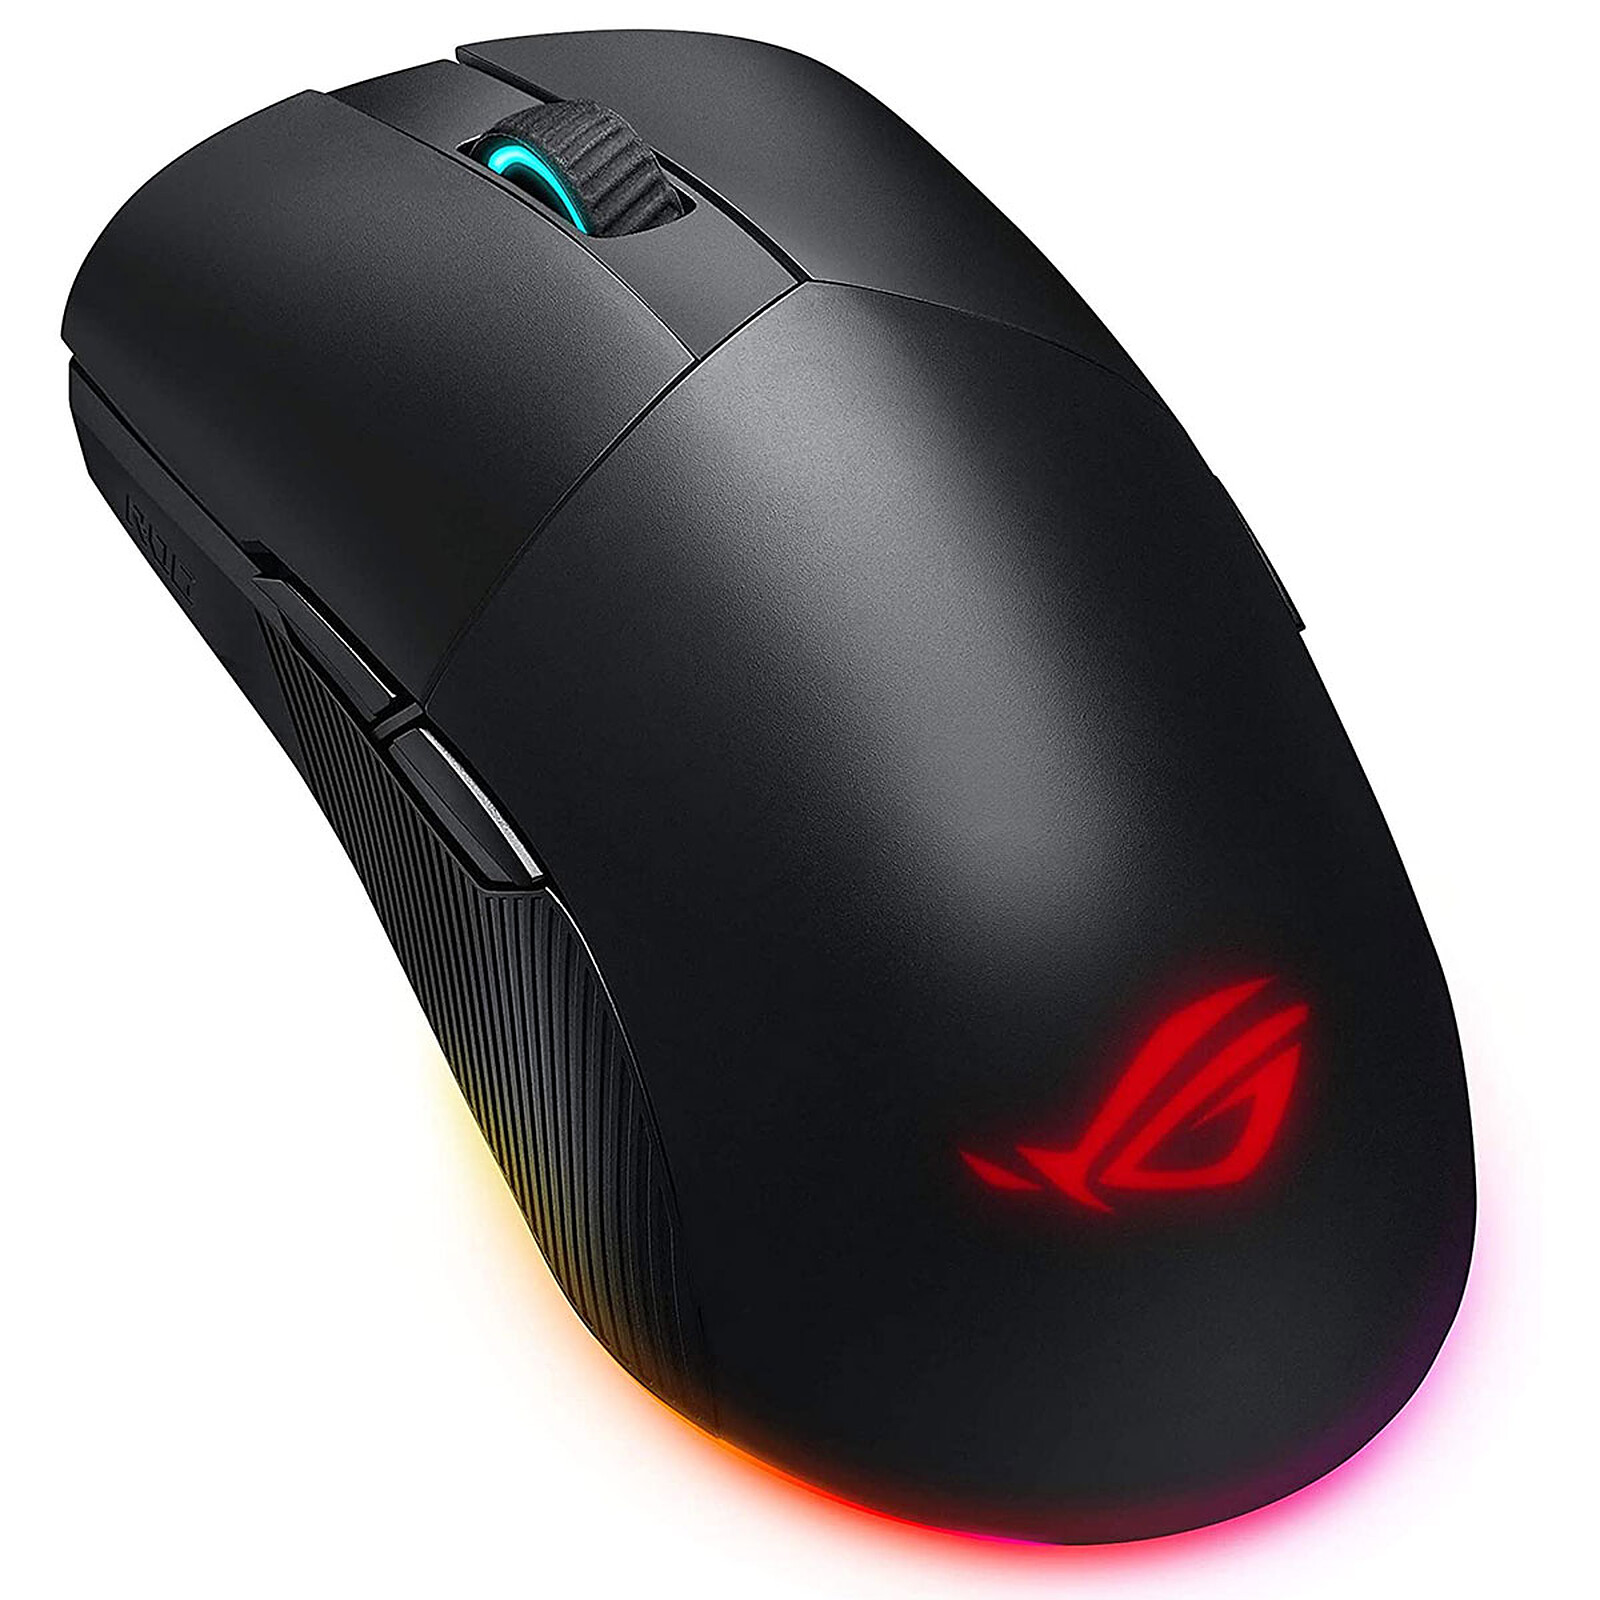 ASUS ROG Pugio II Mouse ASUS on LDLC